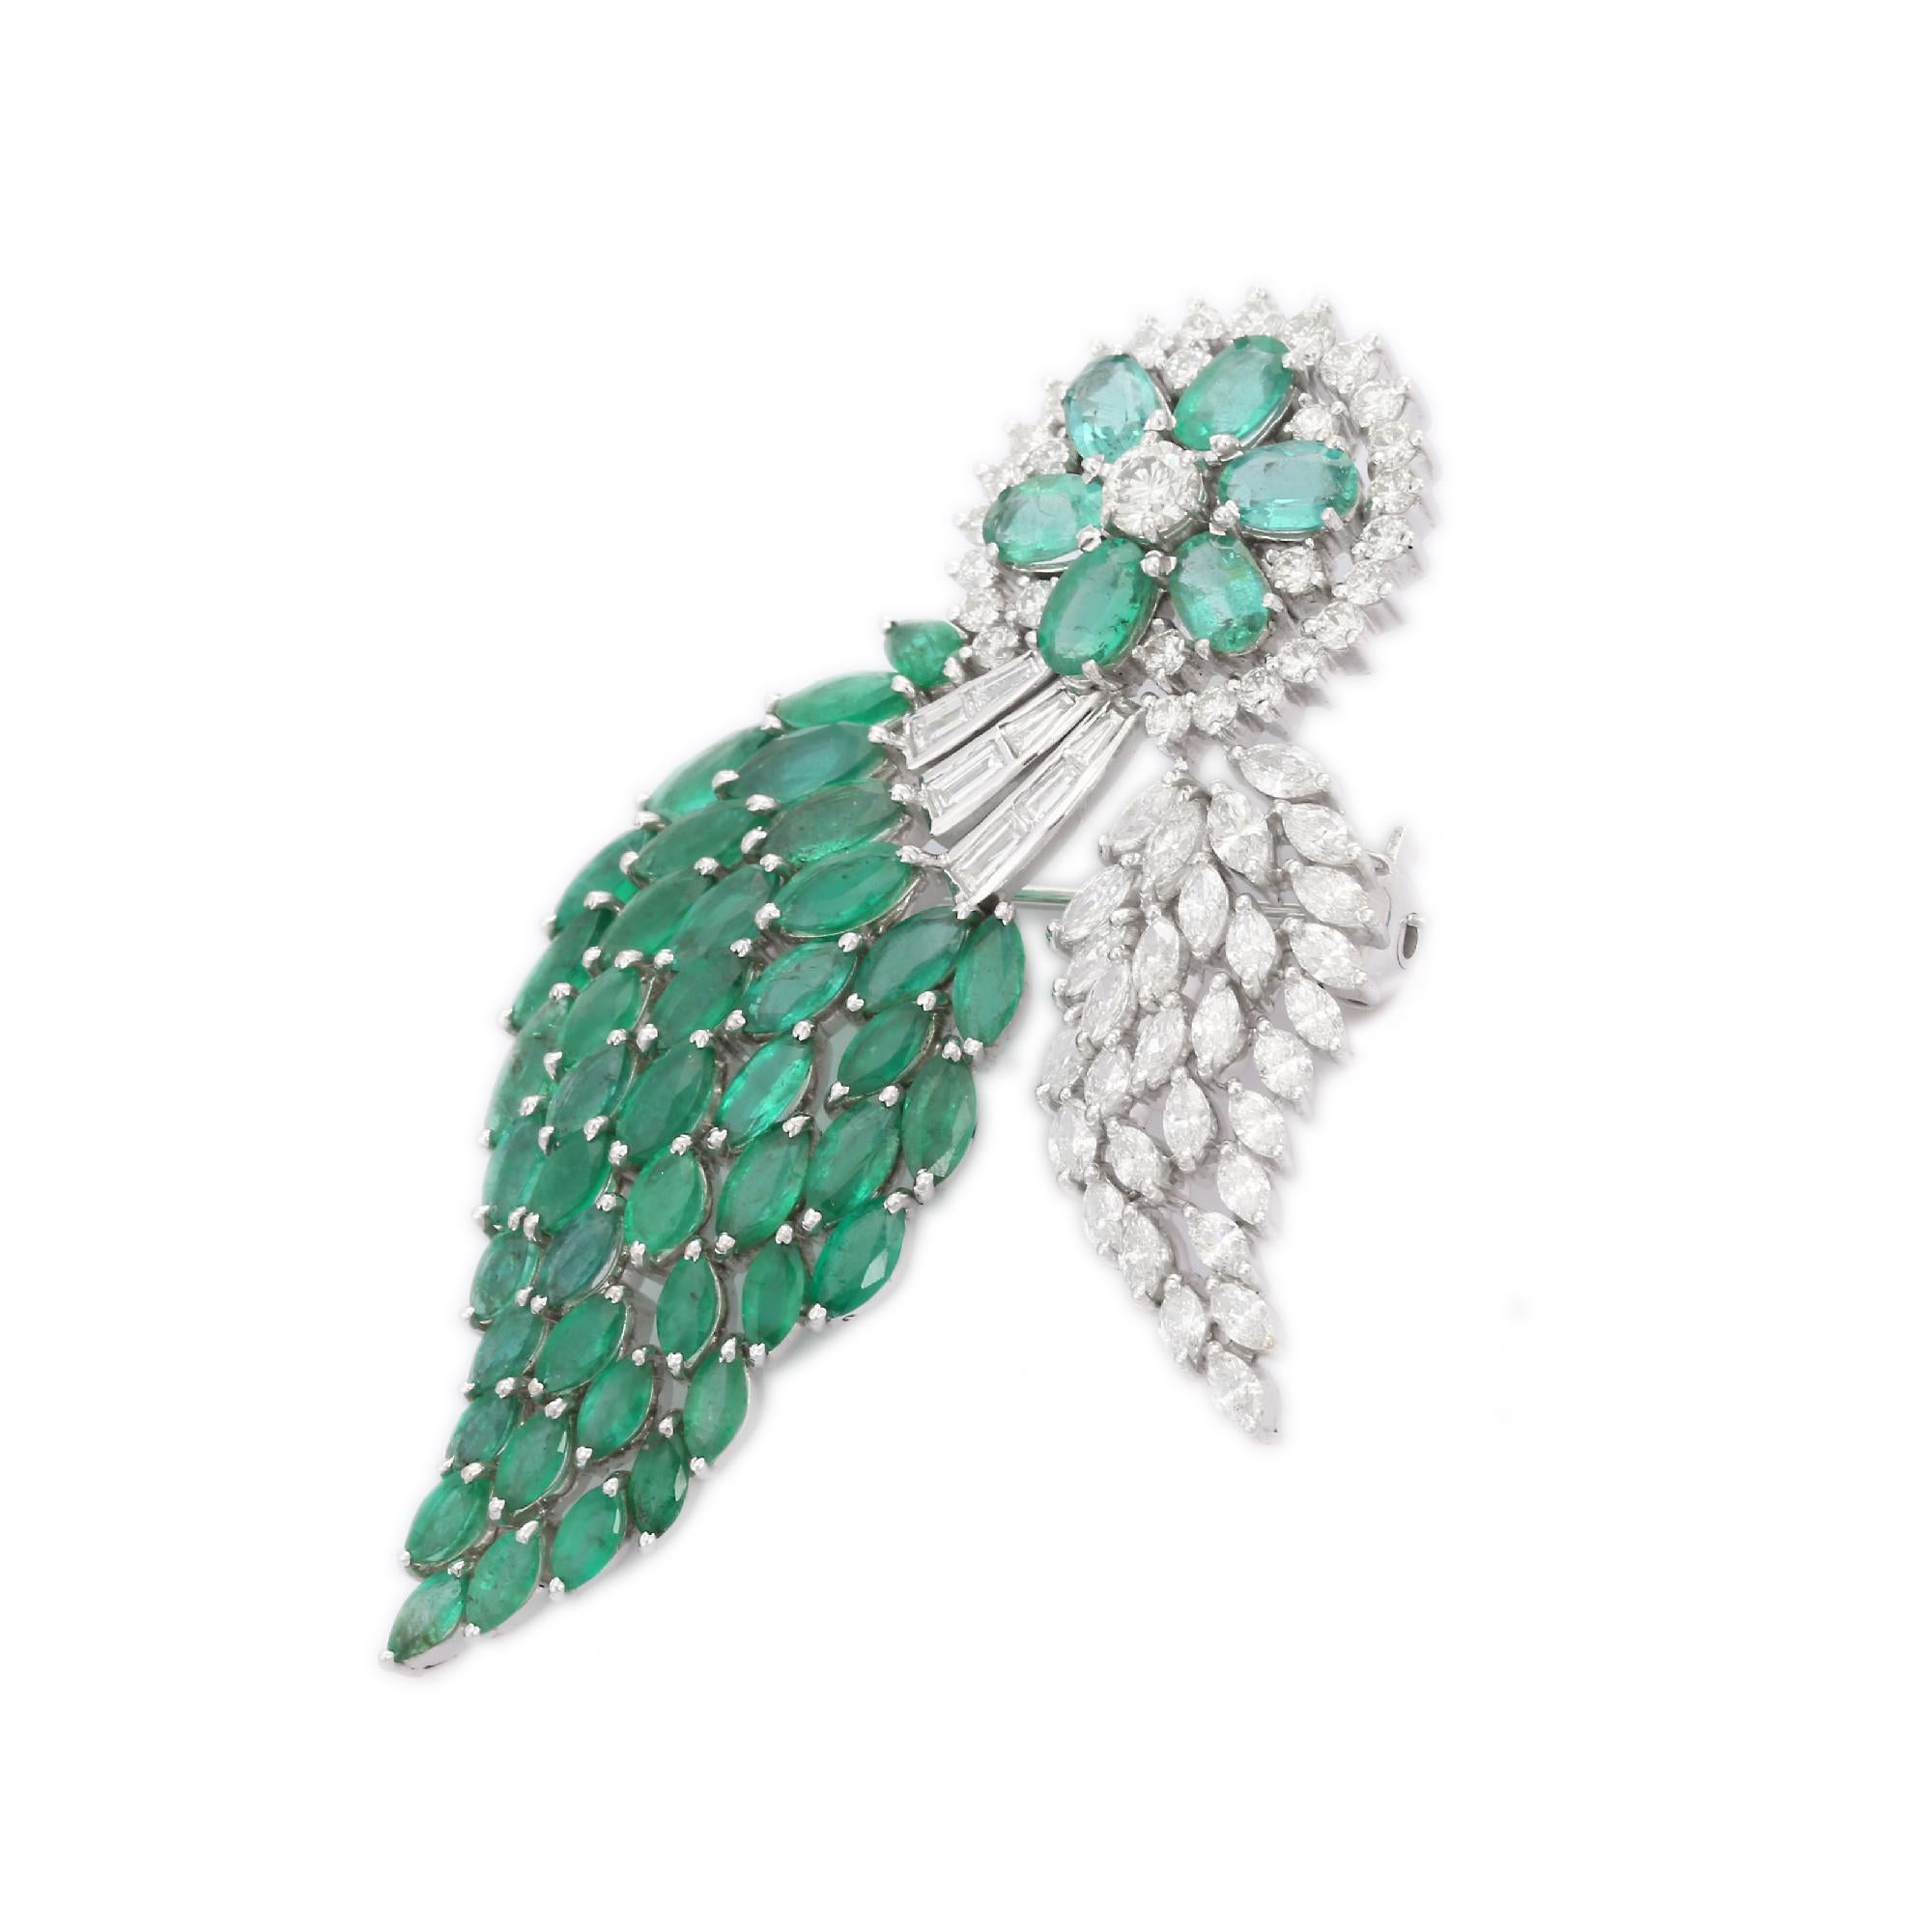 Unisex Emerald Diamond Leaf Brooch Made in 18k Gold which is a fusion of surrealism and pop-art, designed to make a bold statement. Crafted with love and attention to detail, this features 13.20 carats of emerald which makes you stand out of the